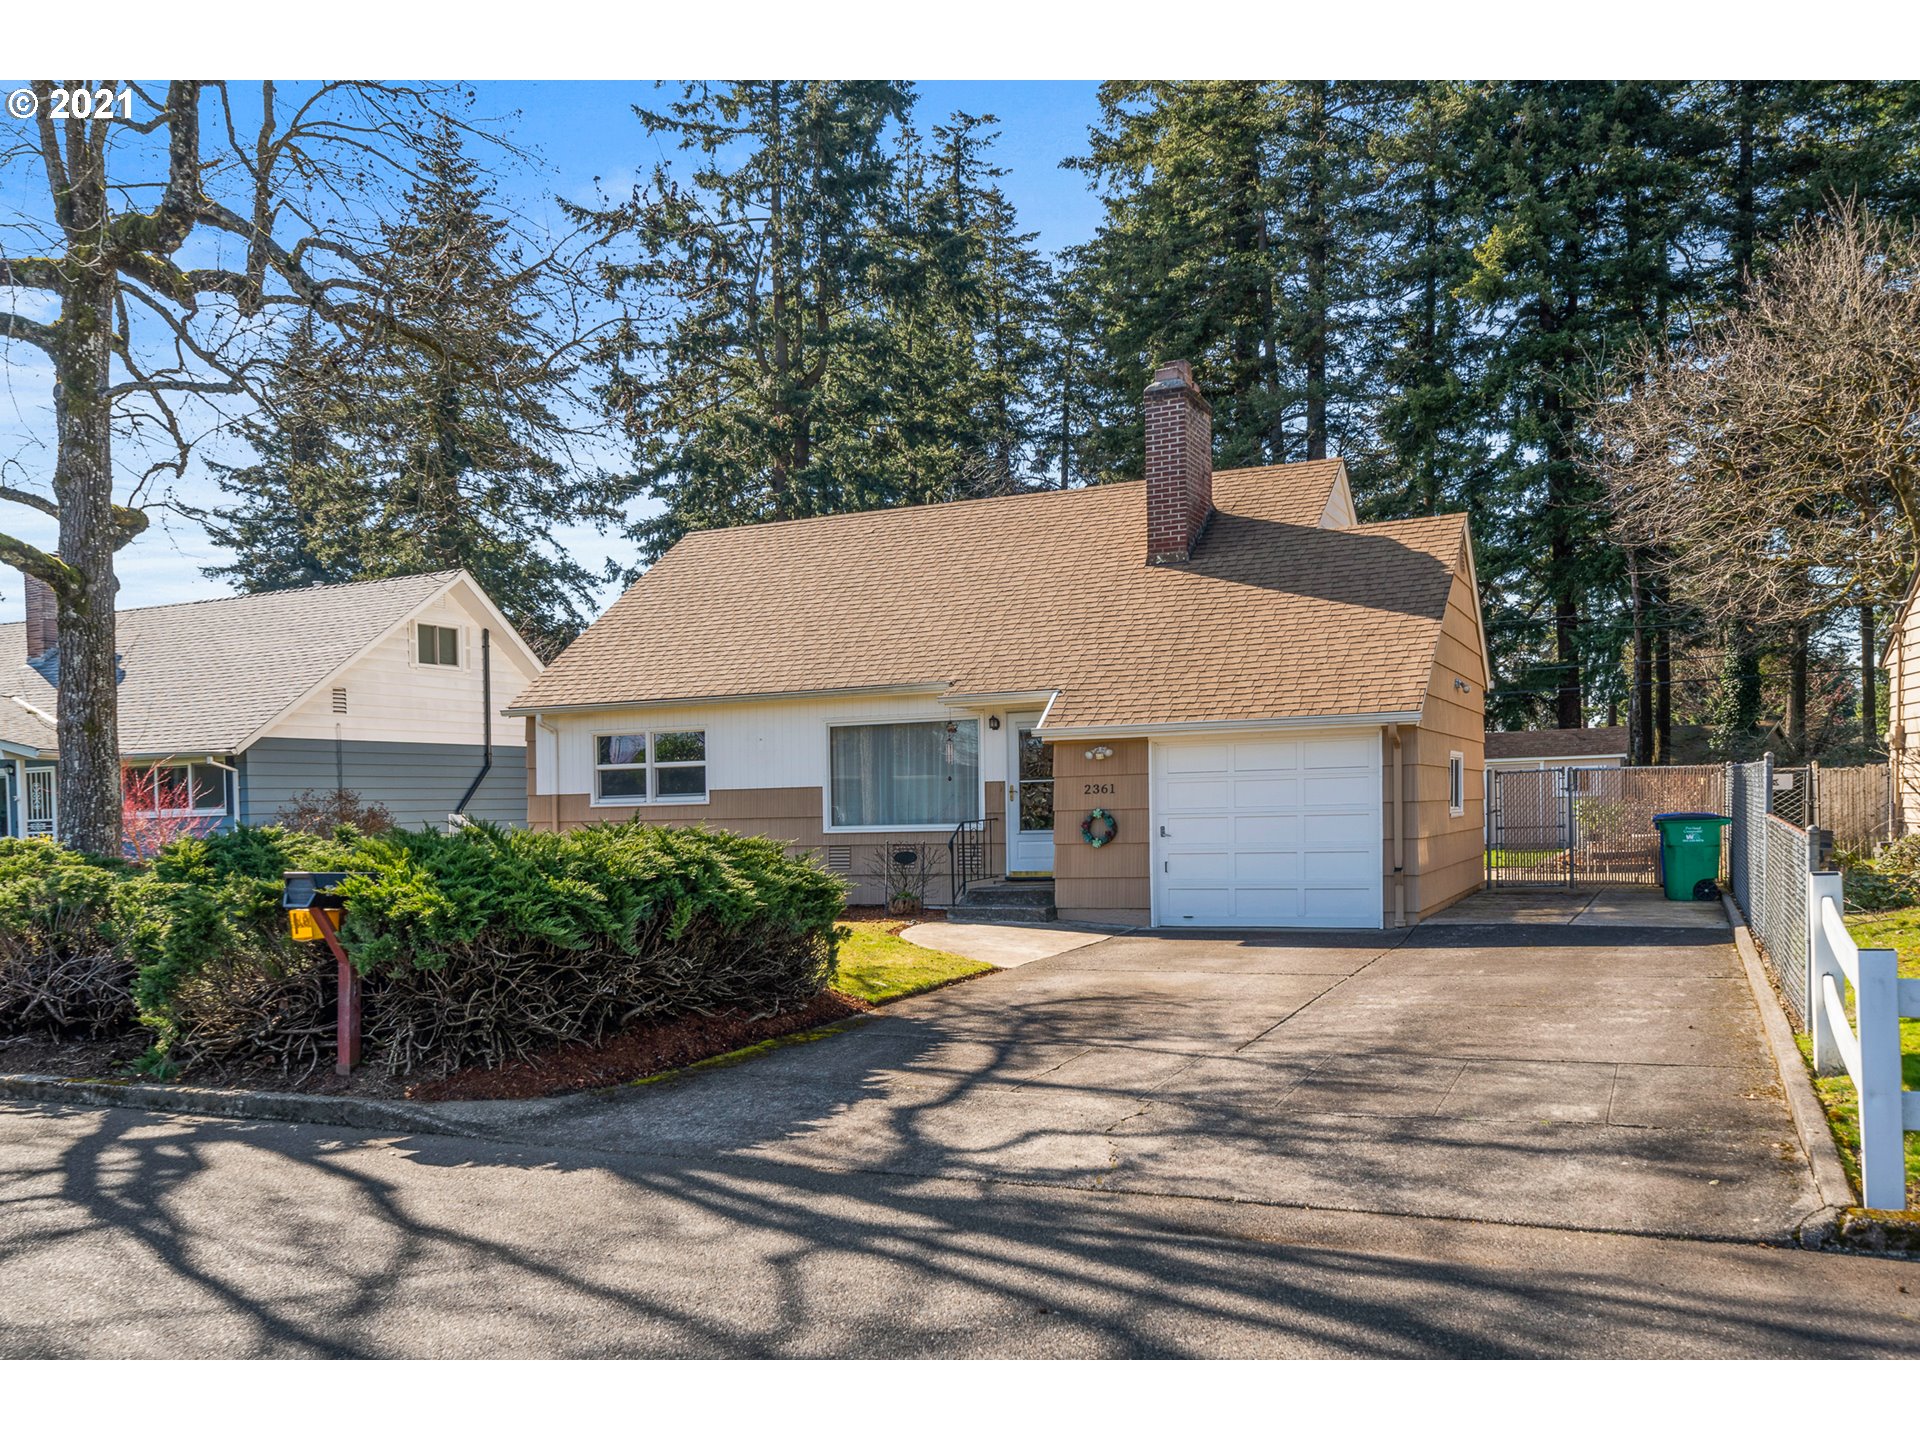 2361 SE 115TH AVE (1 of 21)